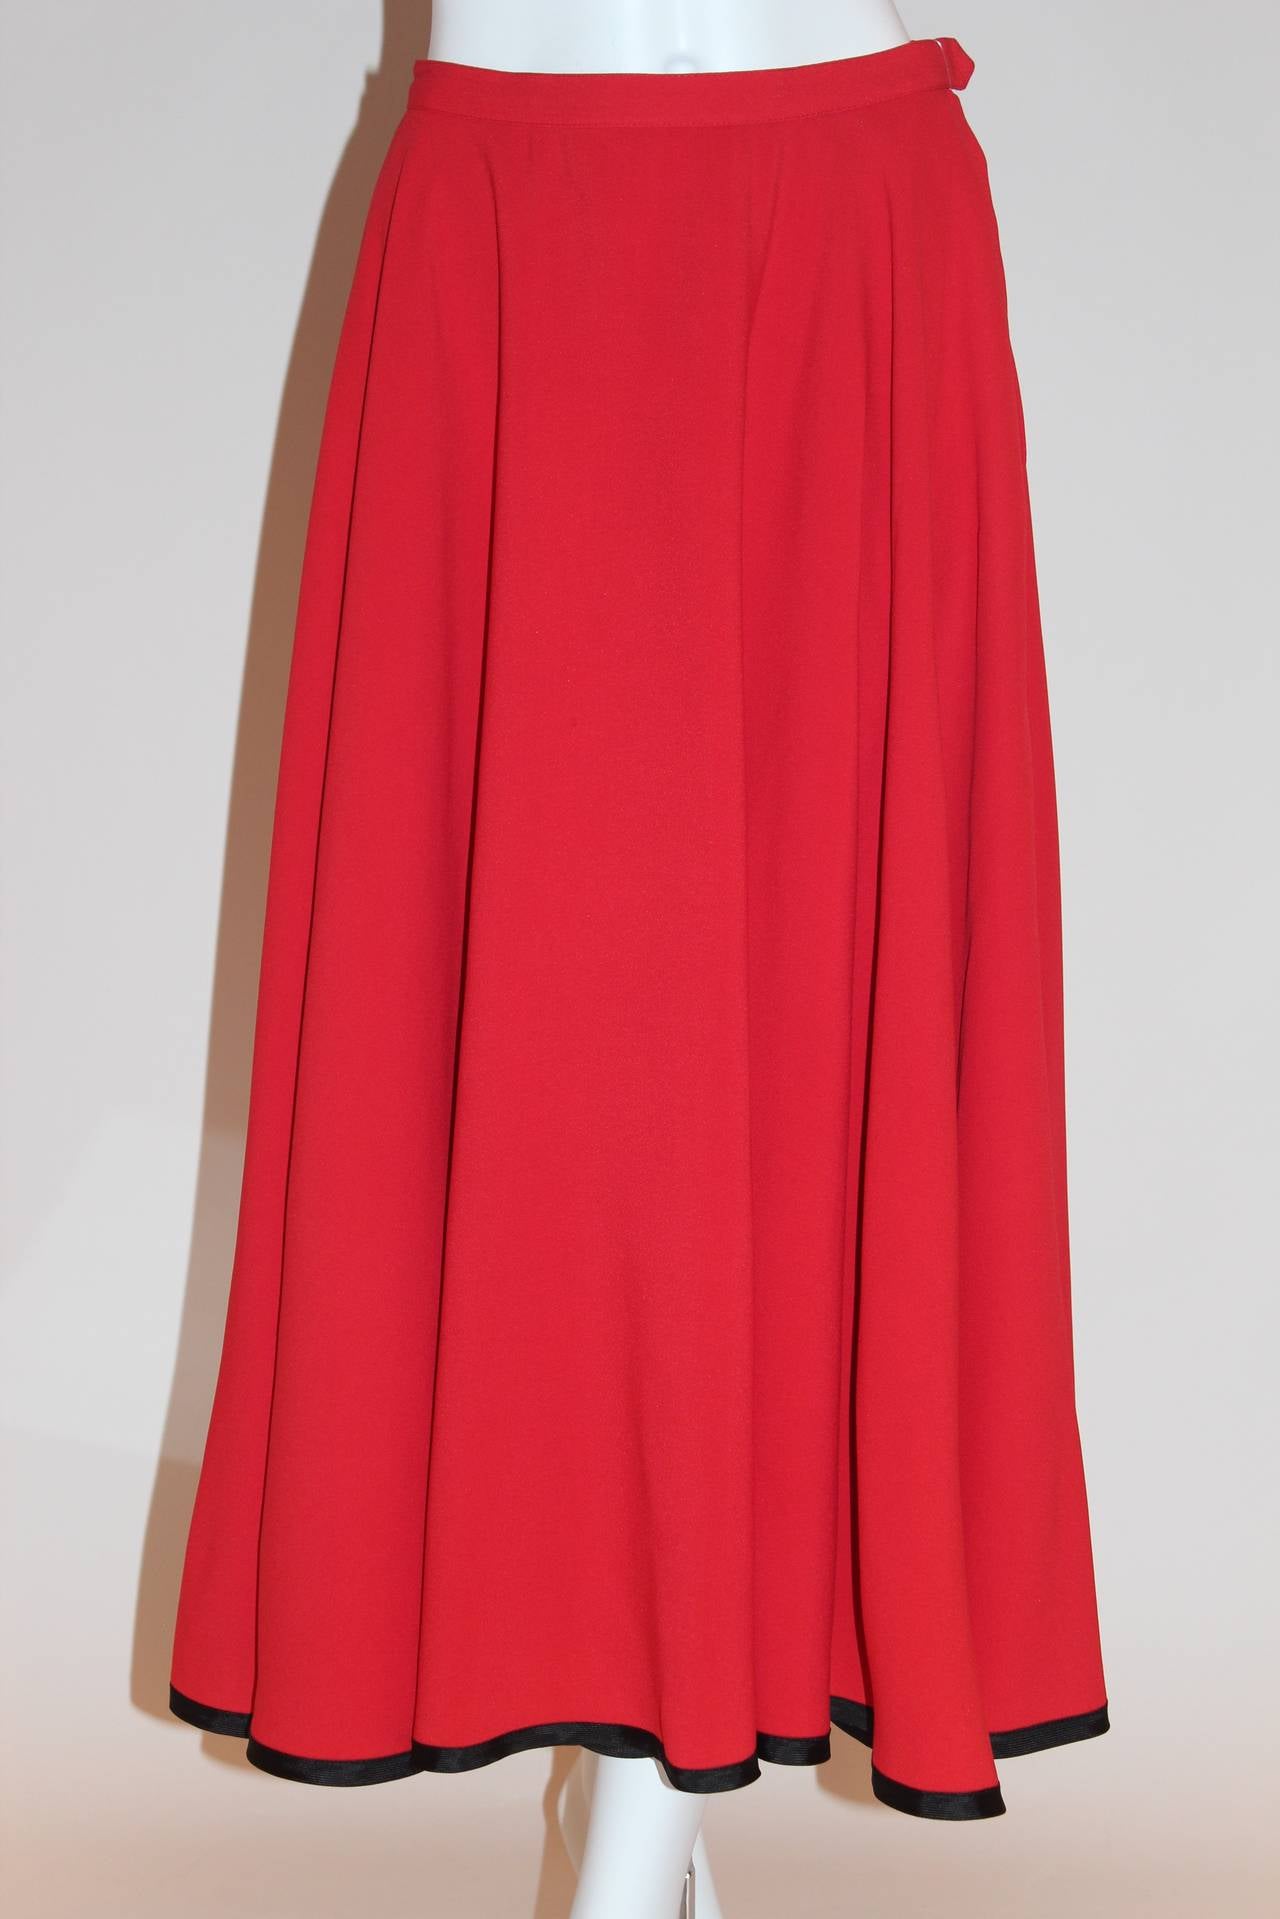 This brilliant red skirt will add a sexy flair to your evening outfit. With its superb, show-stopping color, straight cut, hidden zipper, and black border trim at the bottom, this piece will catch every eye in the room.